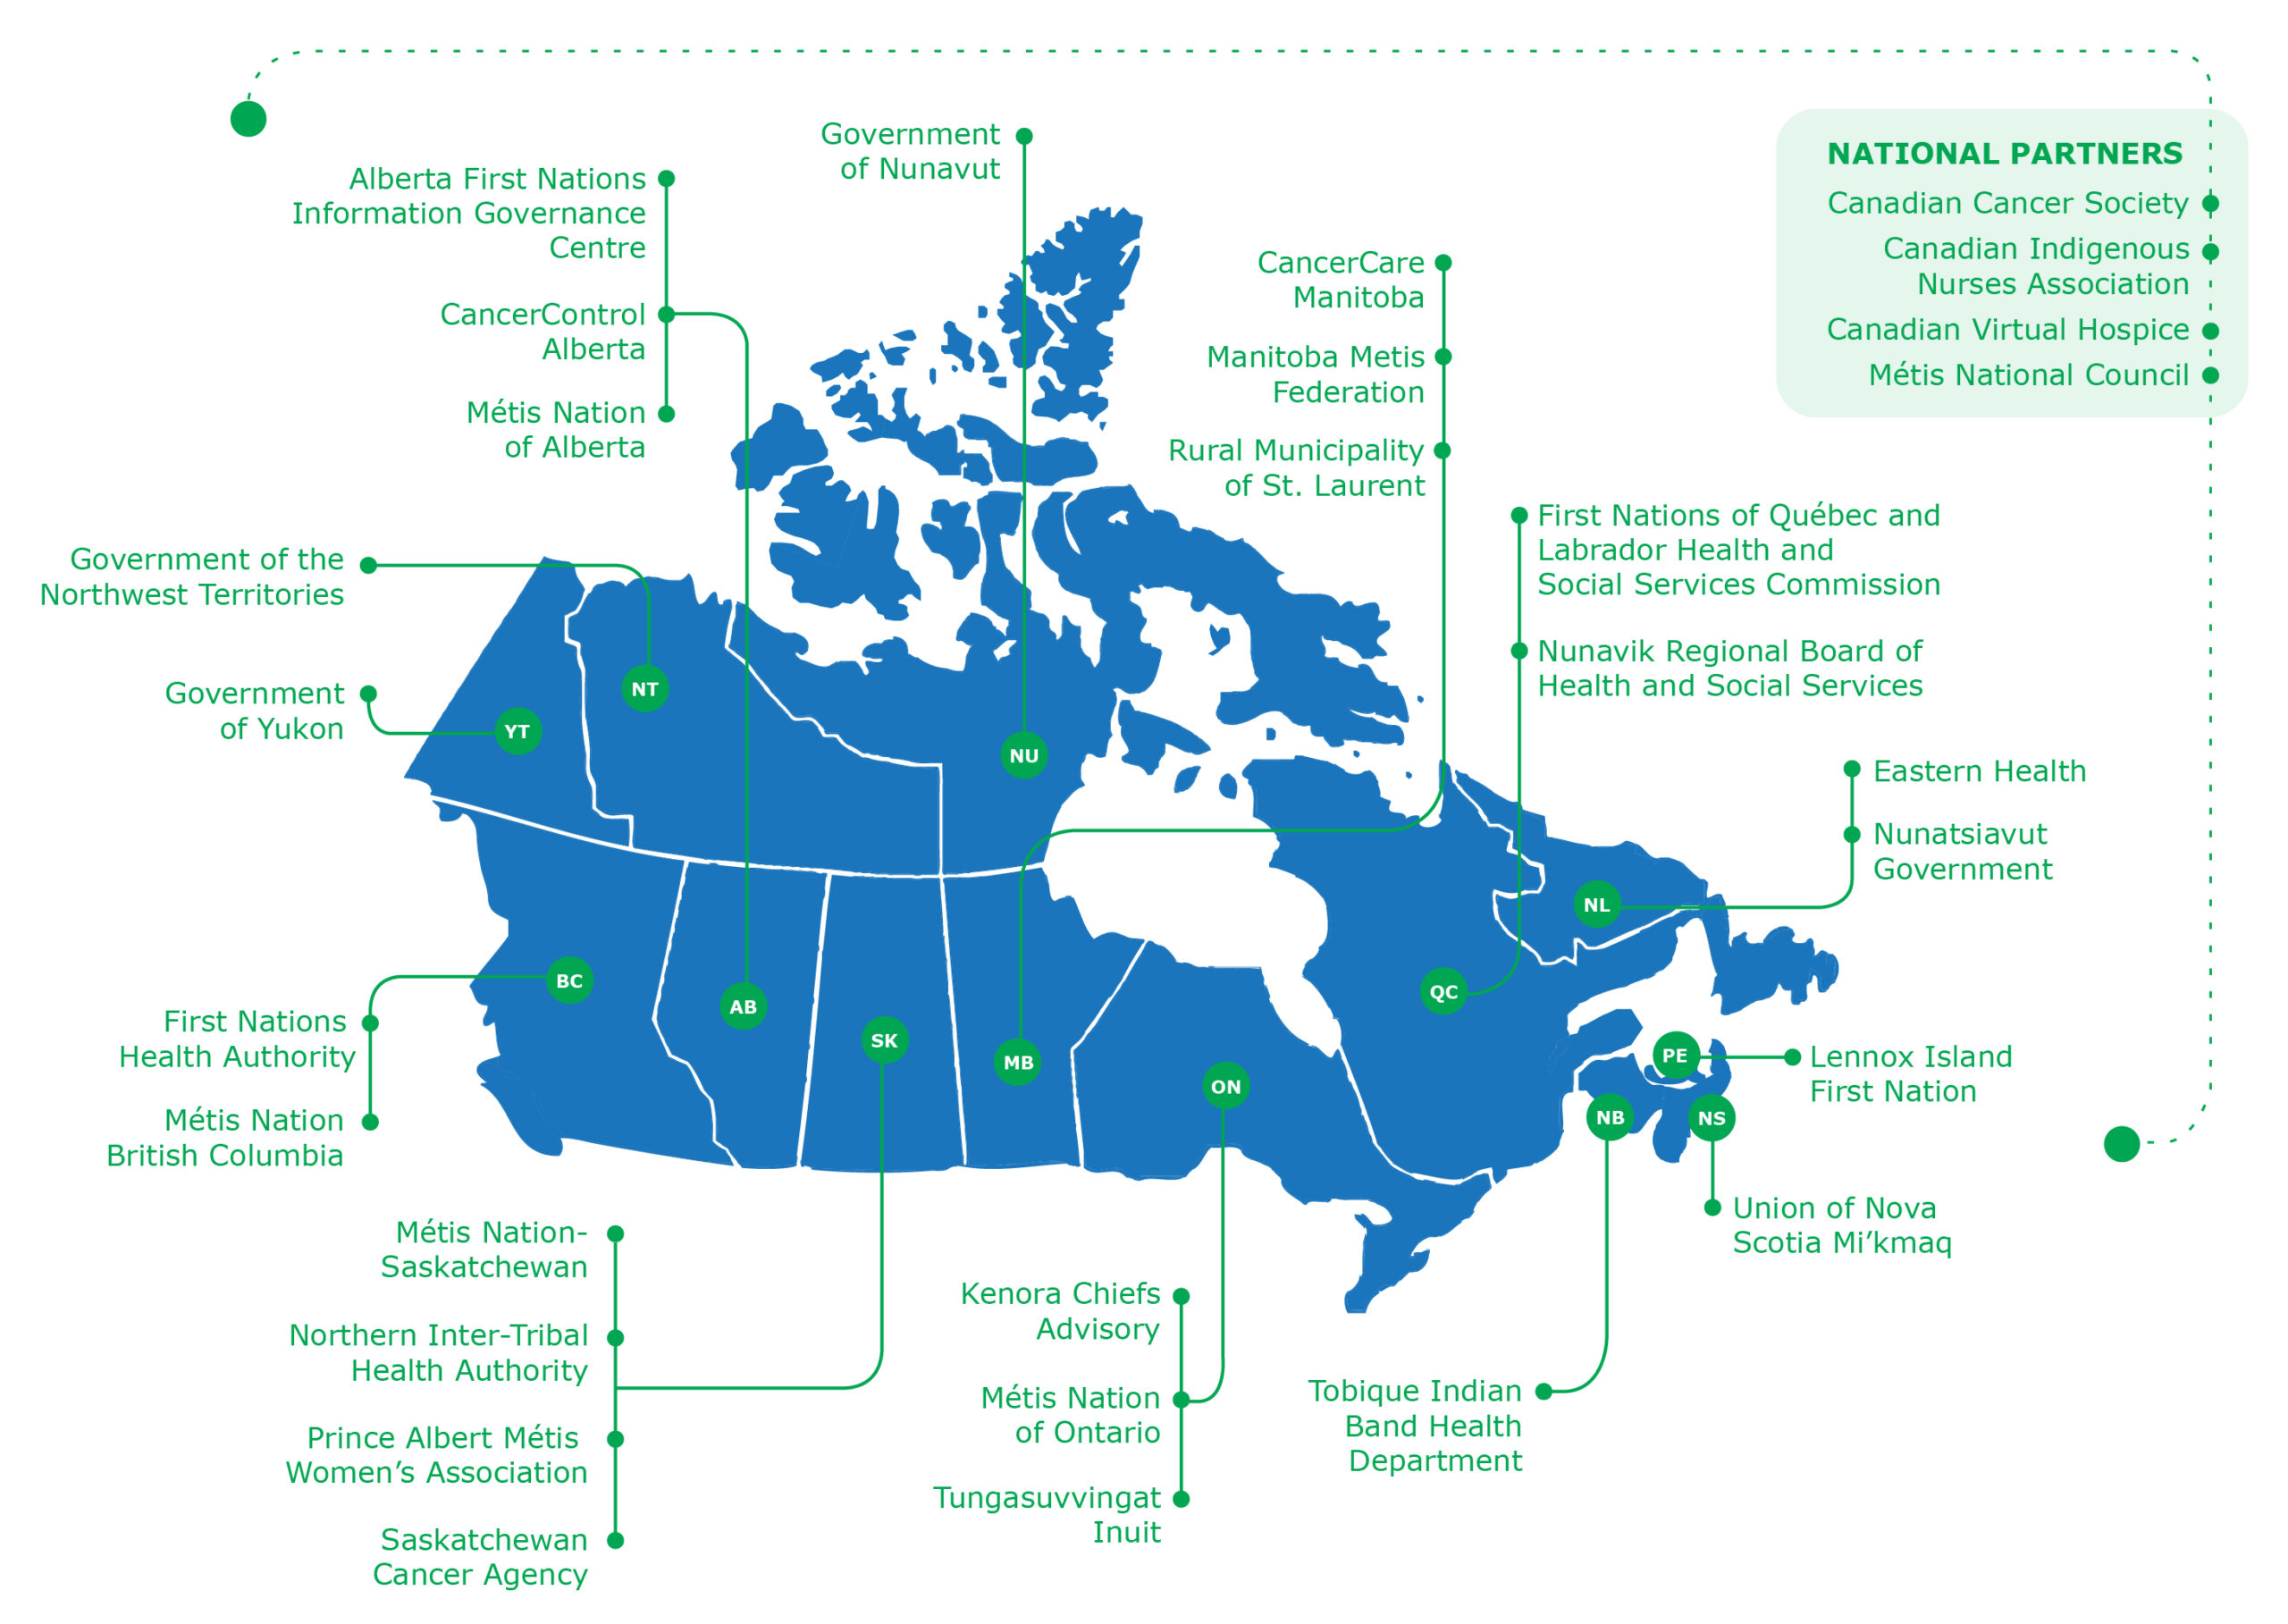 Map of Canada displaying partners